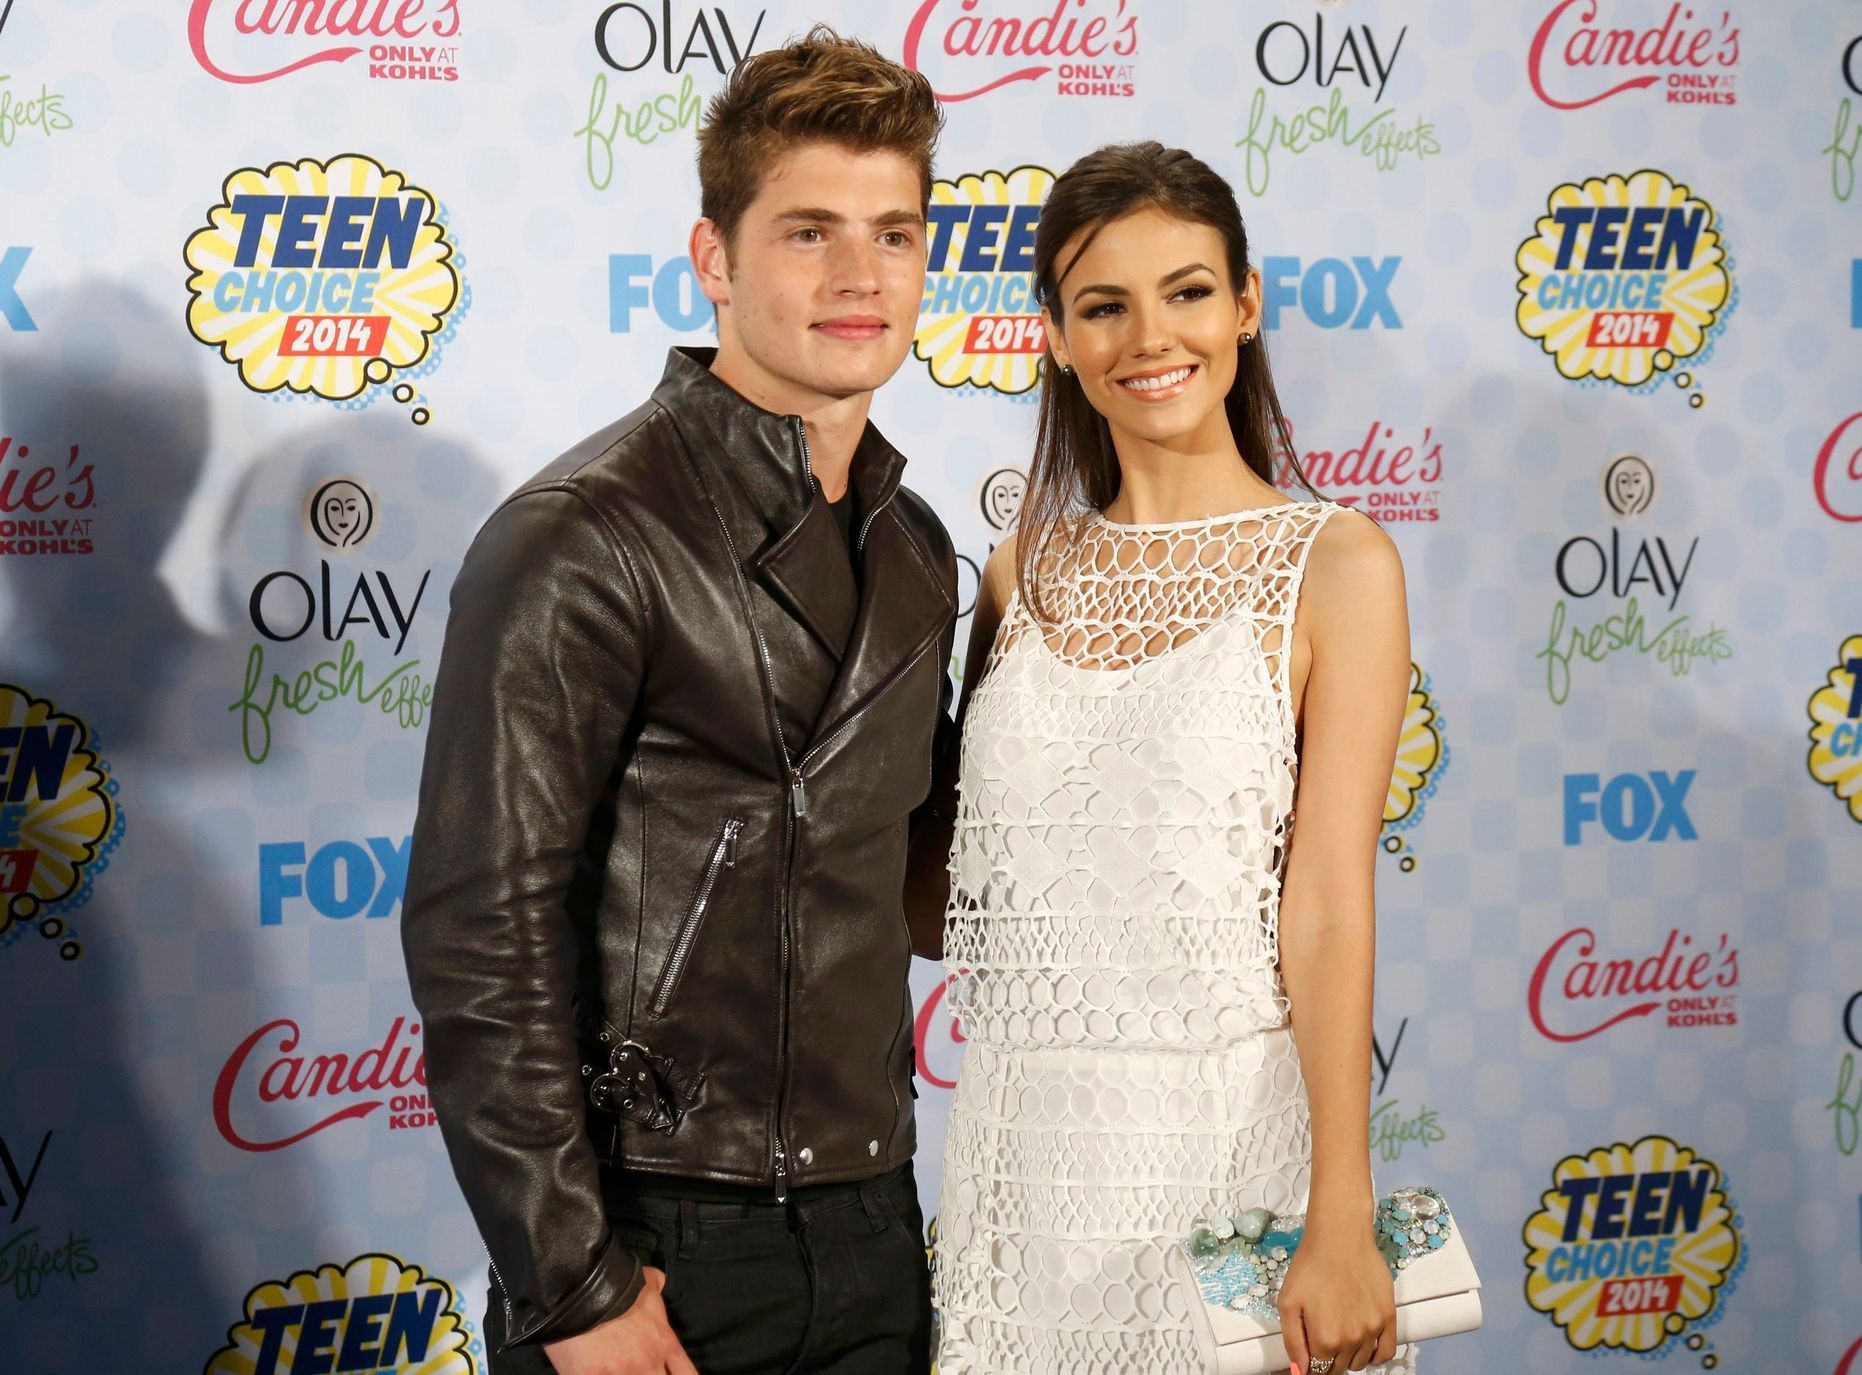 Teen Choice Awards 2014 - Gregg Sulkin and Victoria Justice